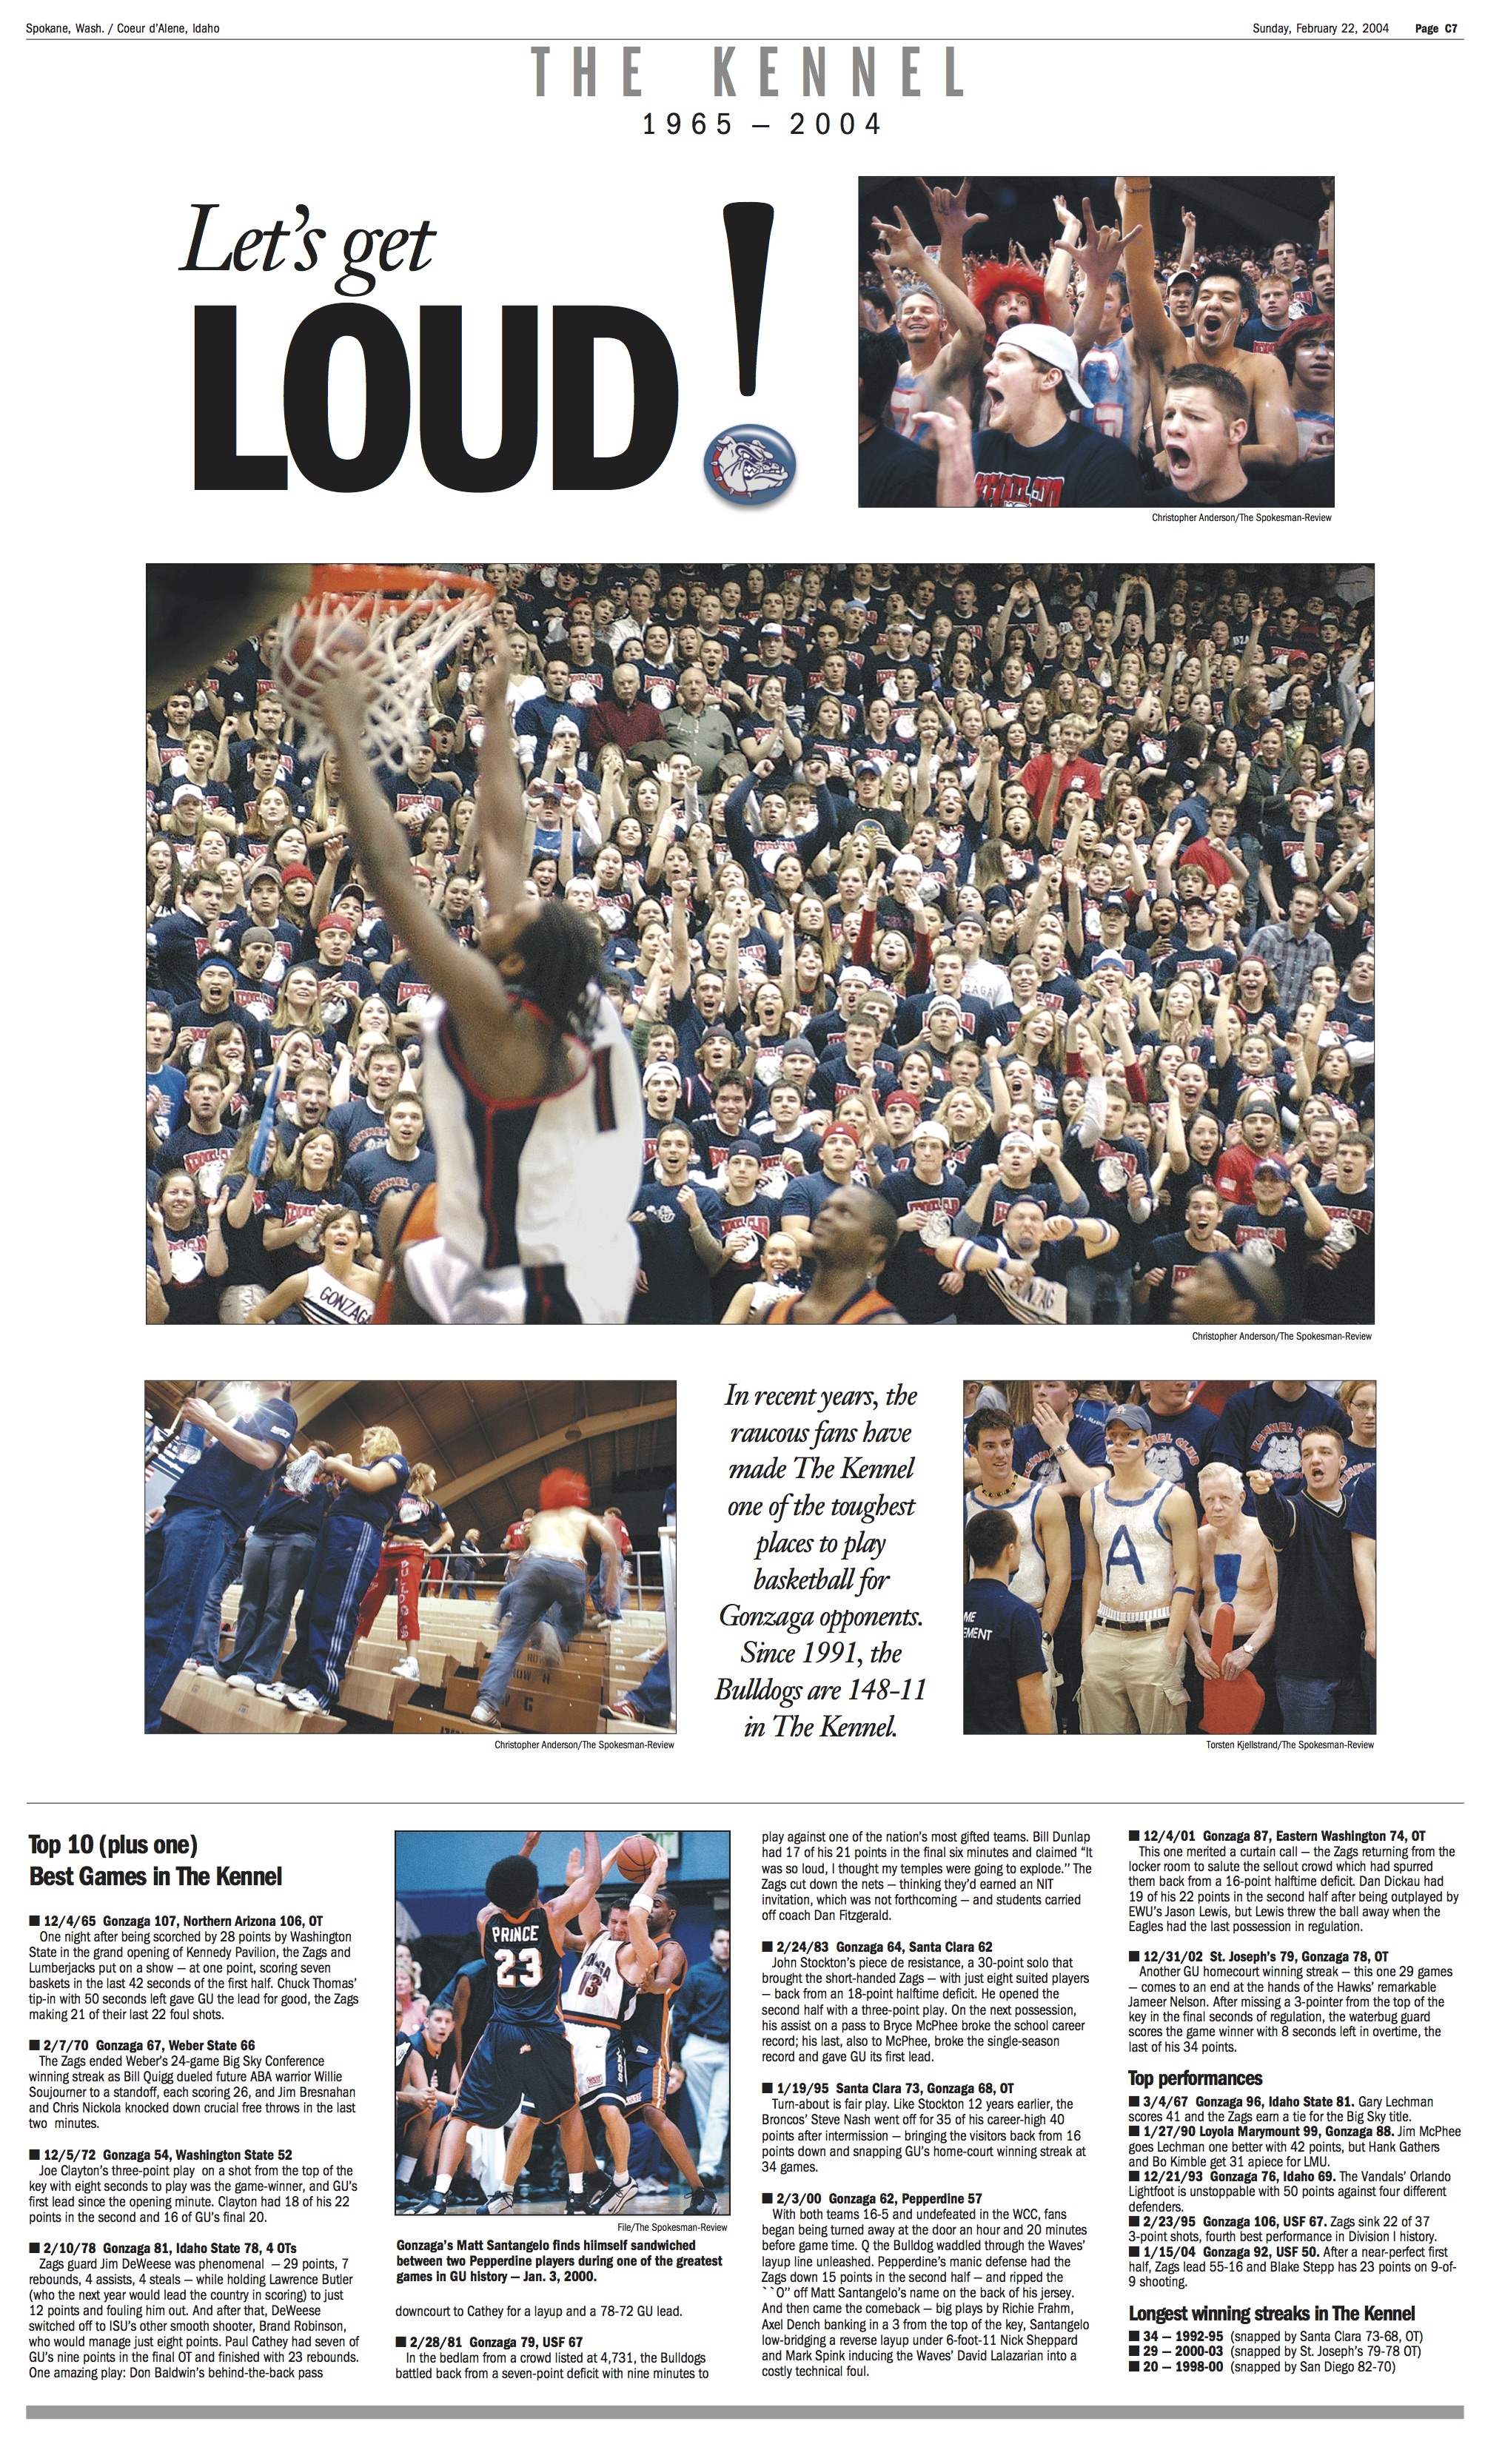 Historic page: Feb. 2, 2004, Kennel farewell